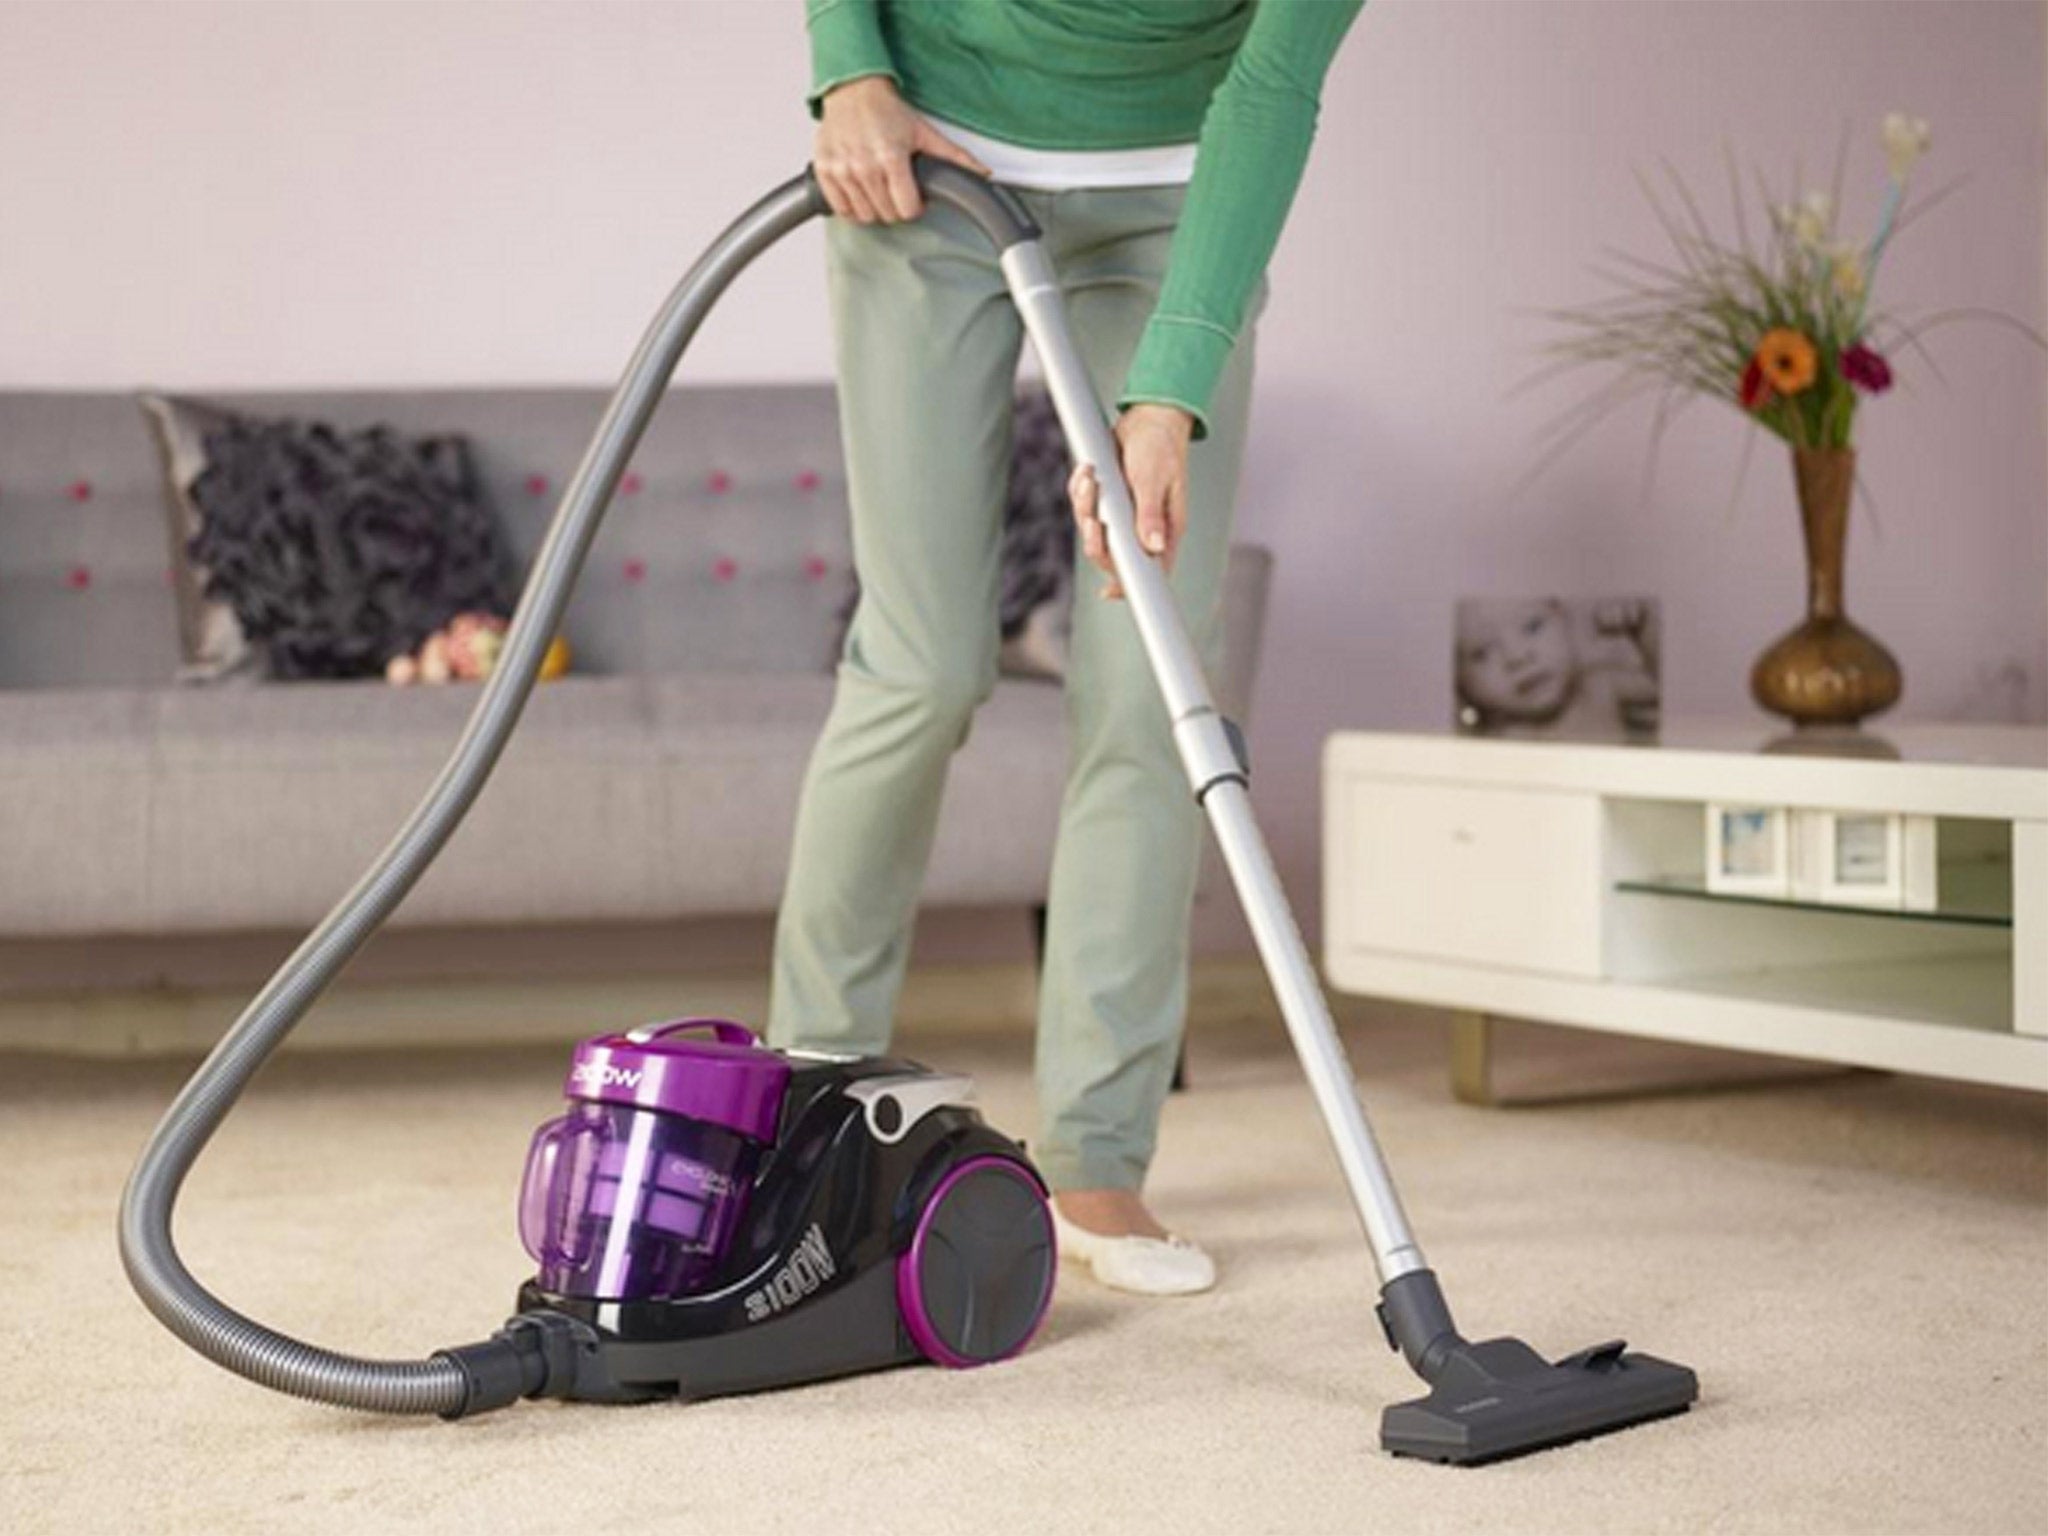 Tesco reported a 44 per cent increase in sales of vacuum cleaners in the second half of August